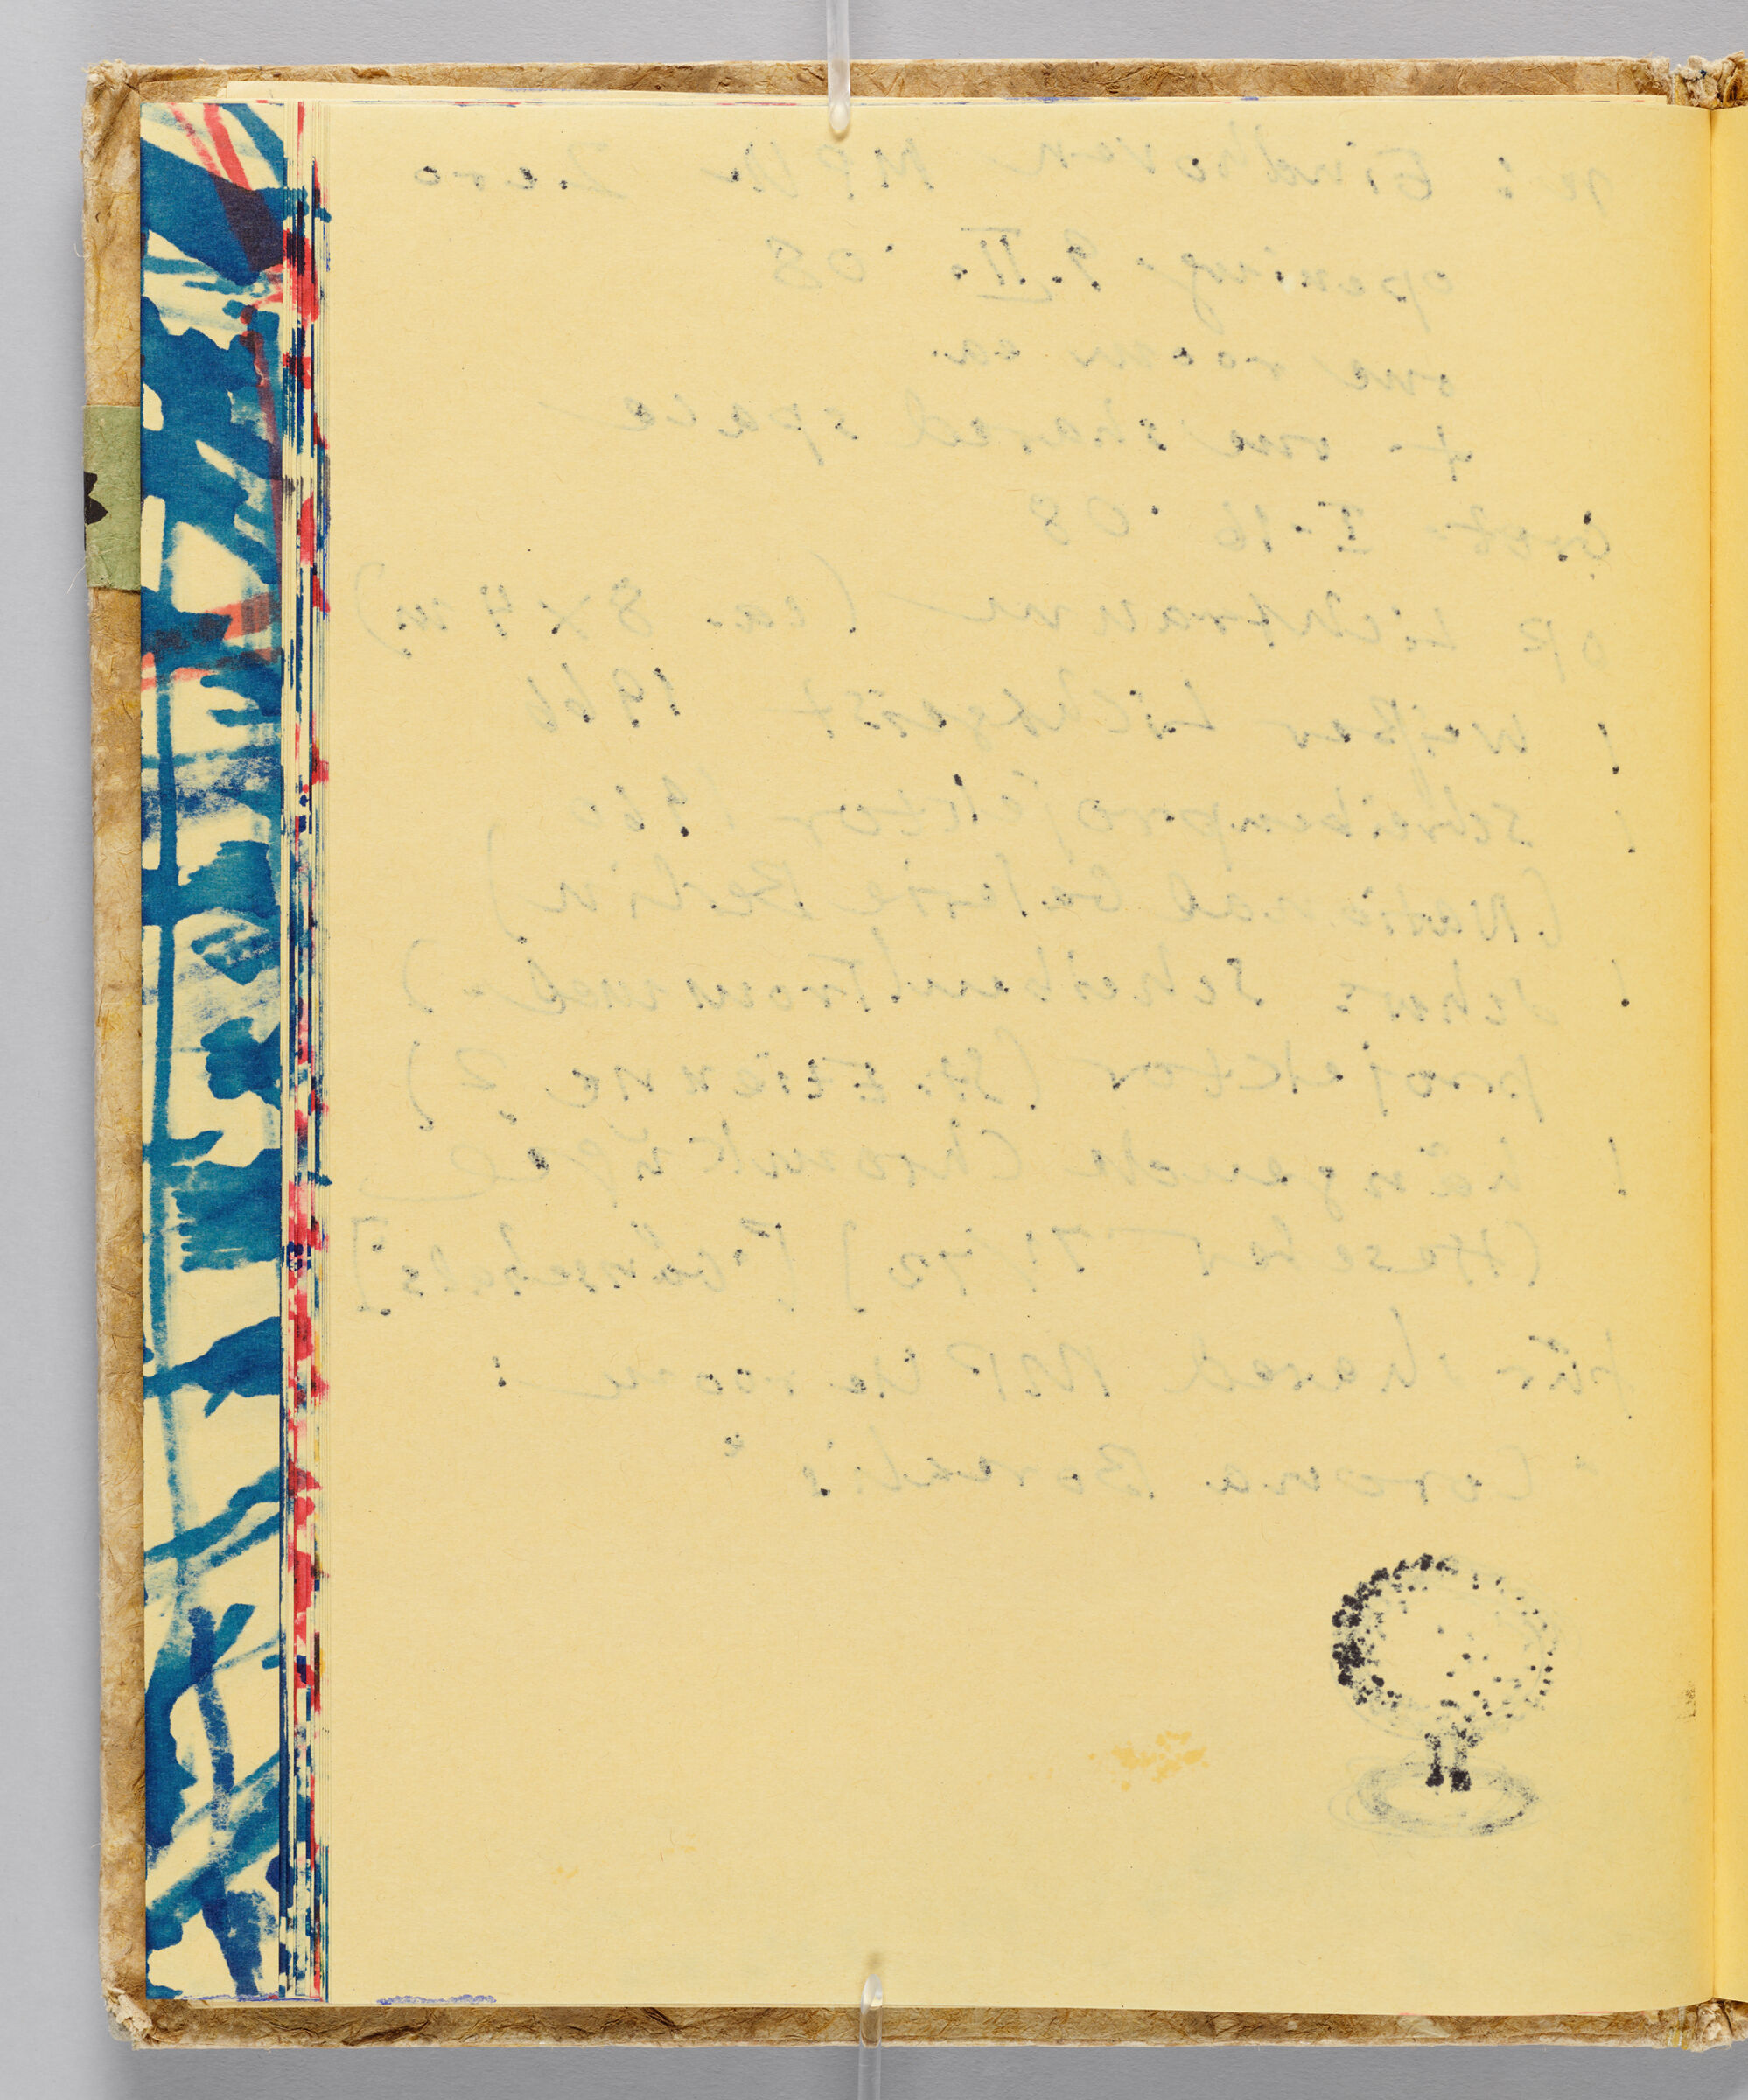 Untitled (Bleed-Through Of Previous Page, Left Page); Untitled (Light Sculptures, Right Page)